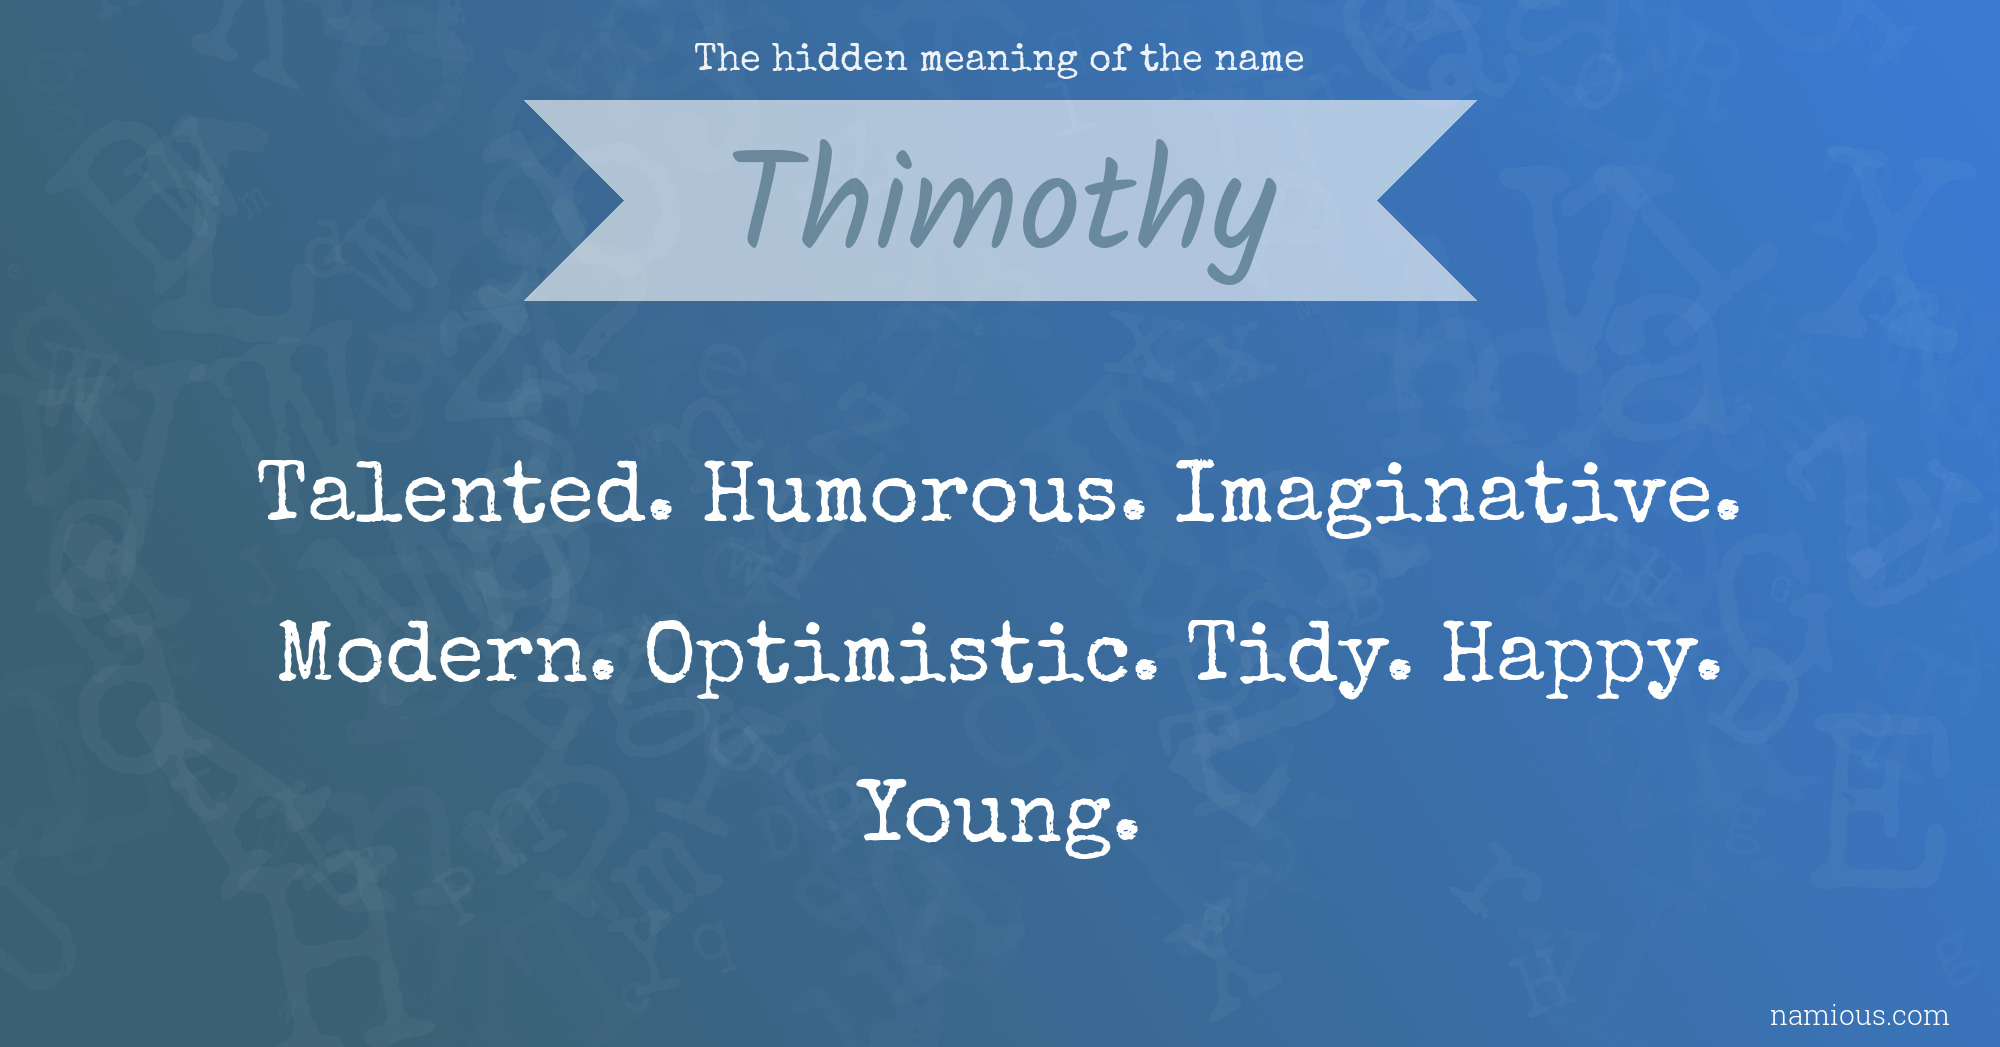 The hidden meaning of the name Thimothy